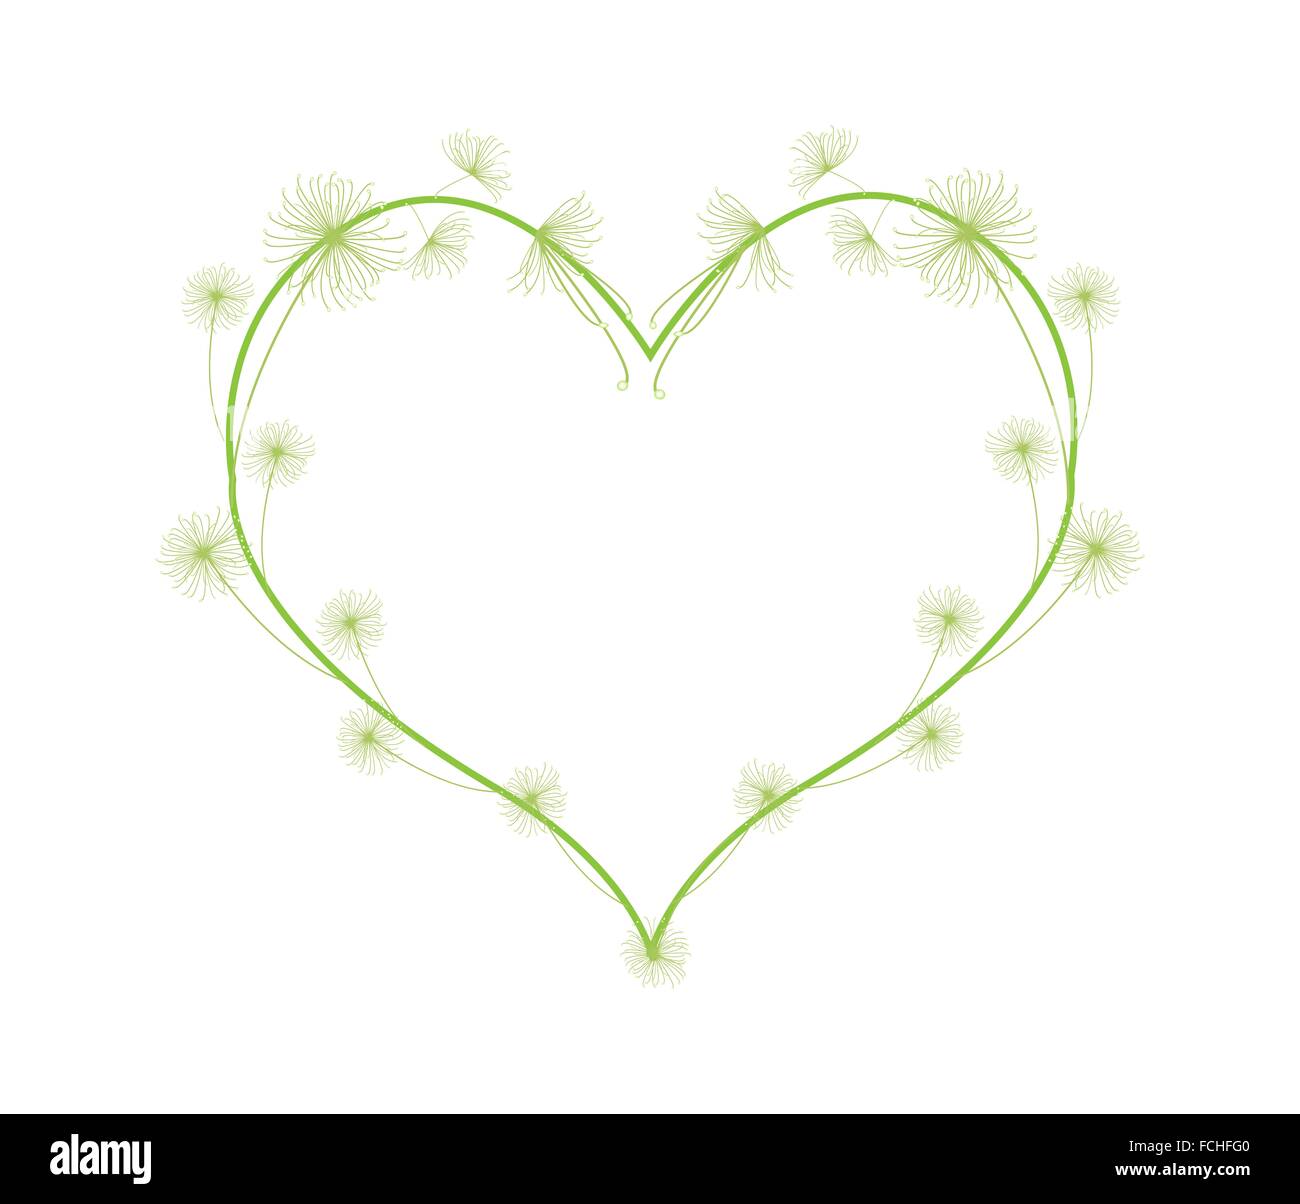 Love Concept, Illustration of Green Cyperus Papyrus or Cyperaceae Plants Forming in A Heart Shape Isolated on White Background. Stock Photo